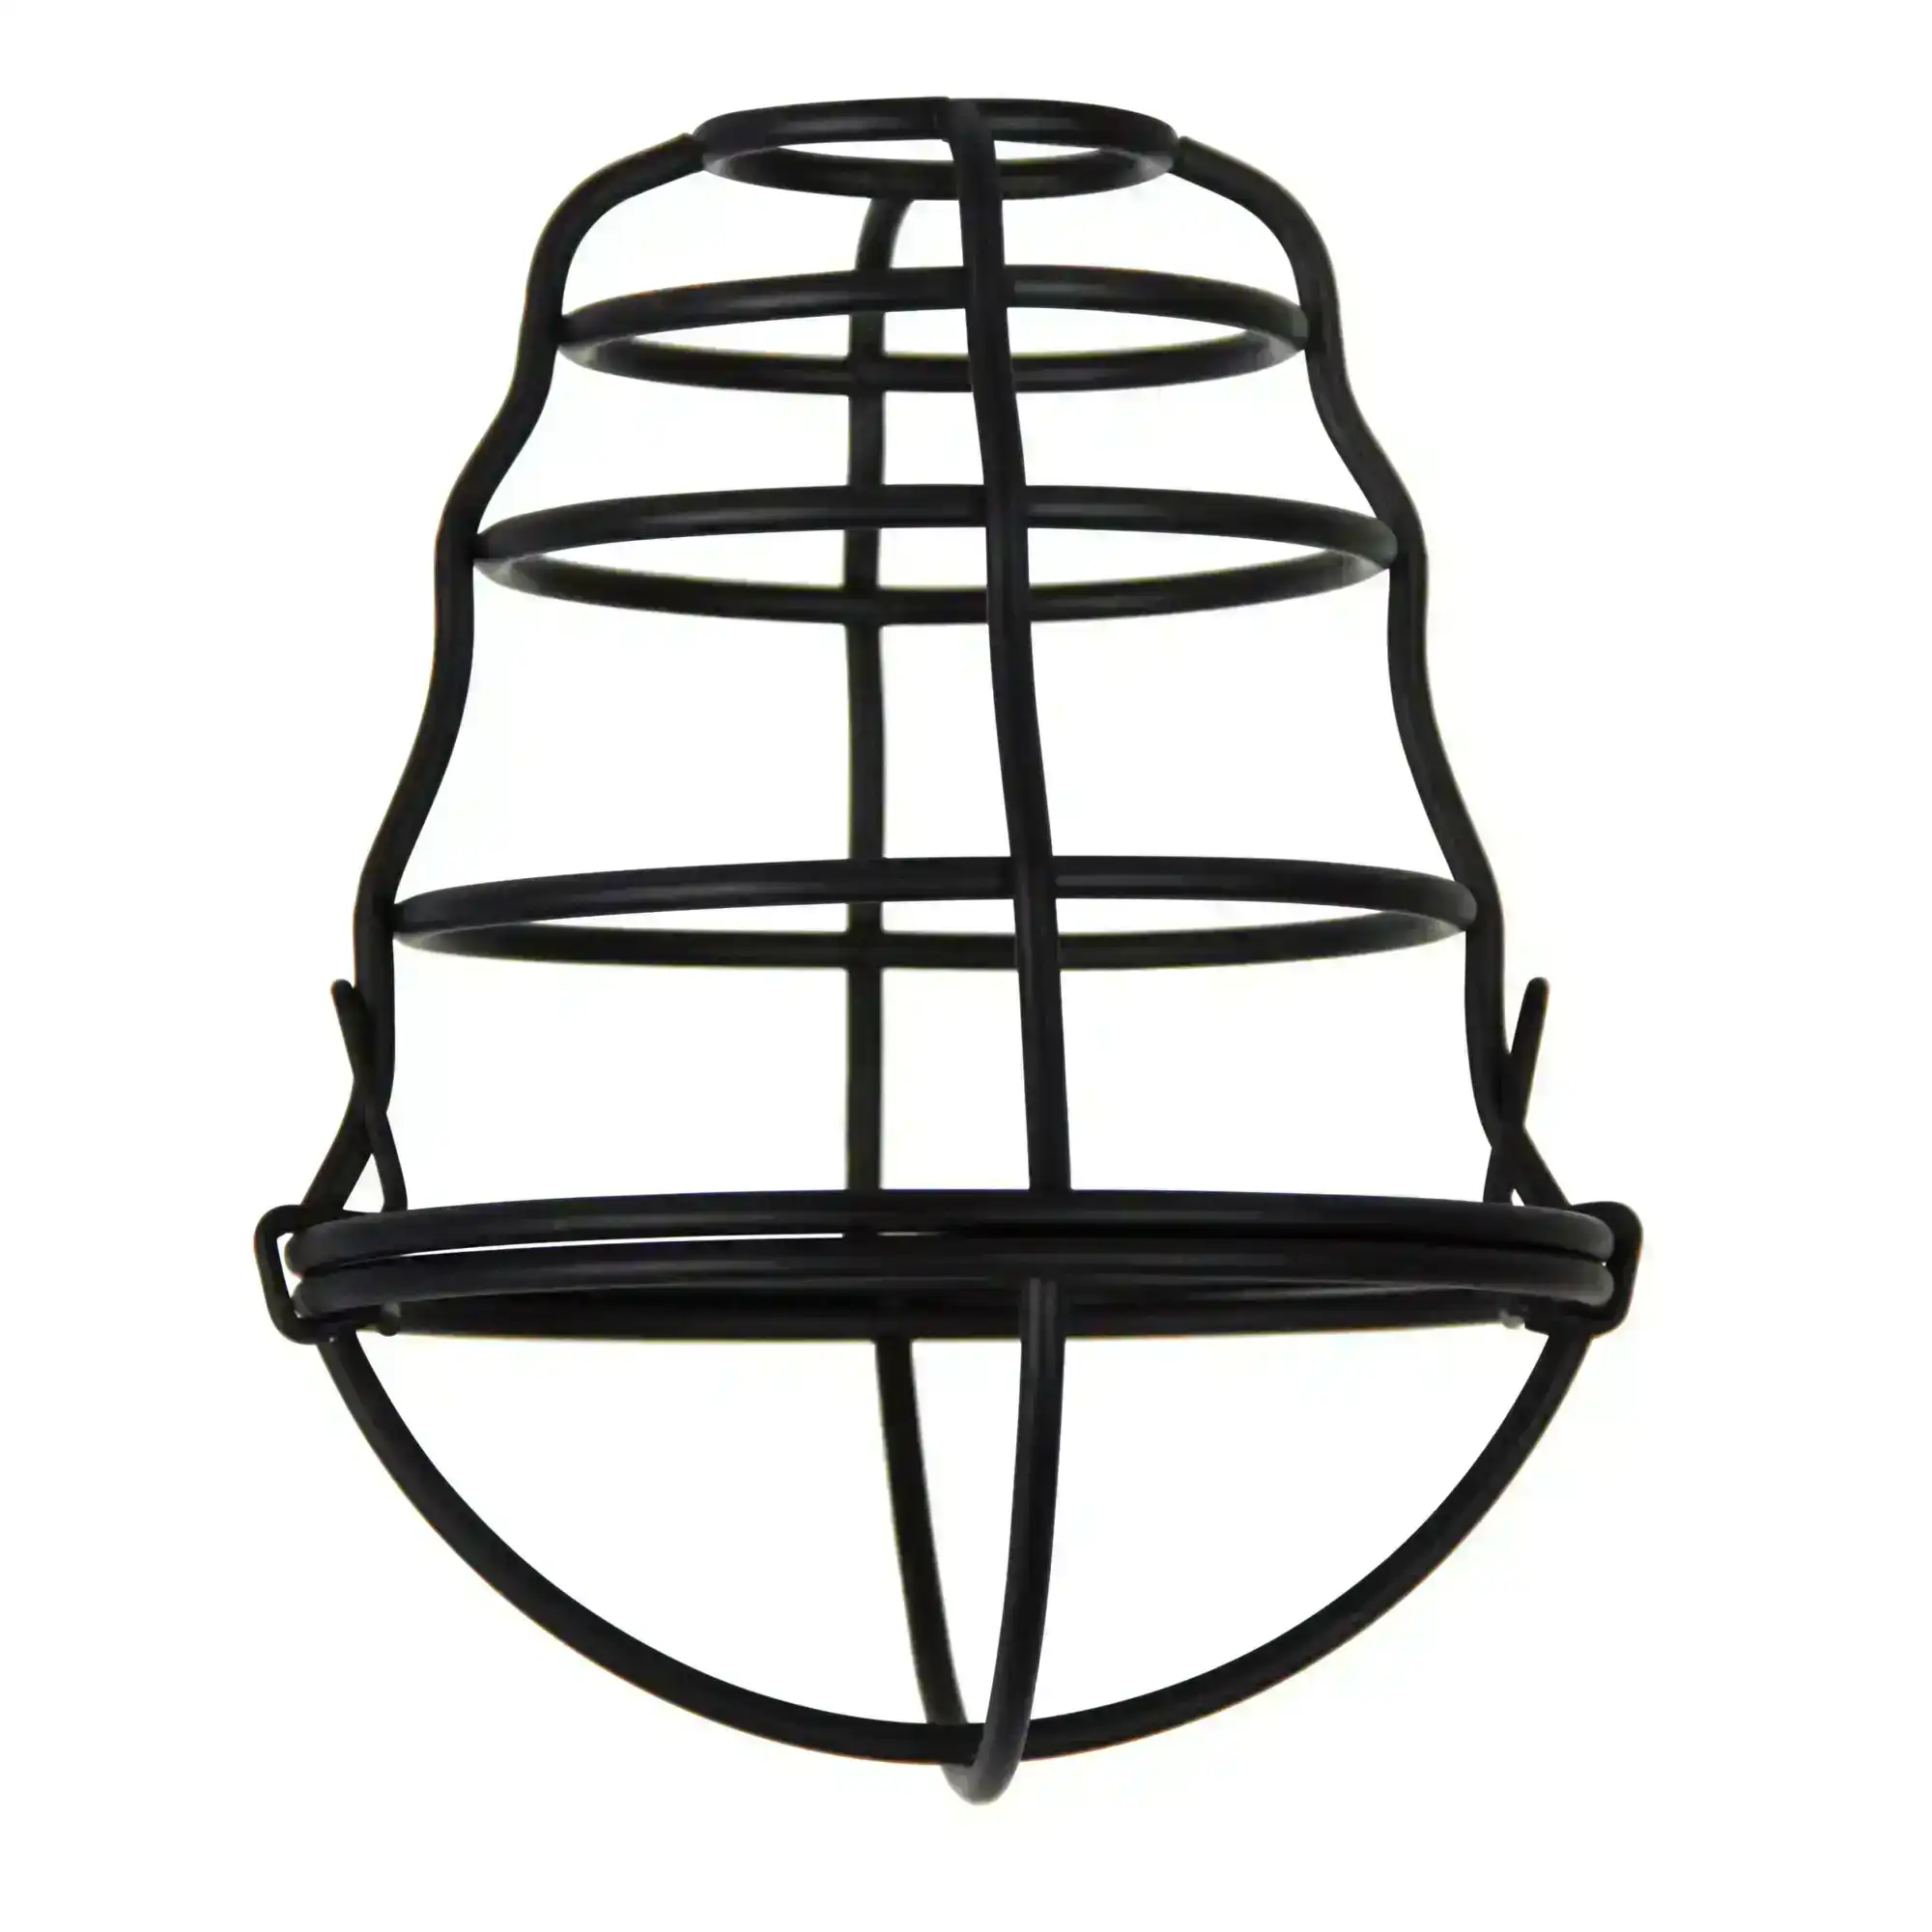 CAGE.14 Pendant Light 14cm Metal Wire Industrial Style Shade